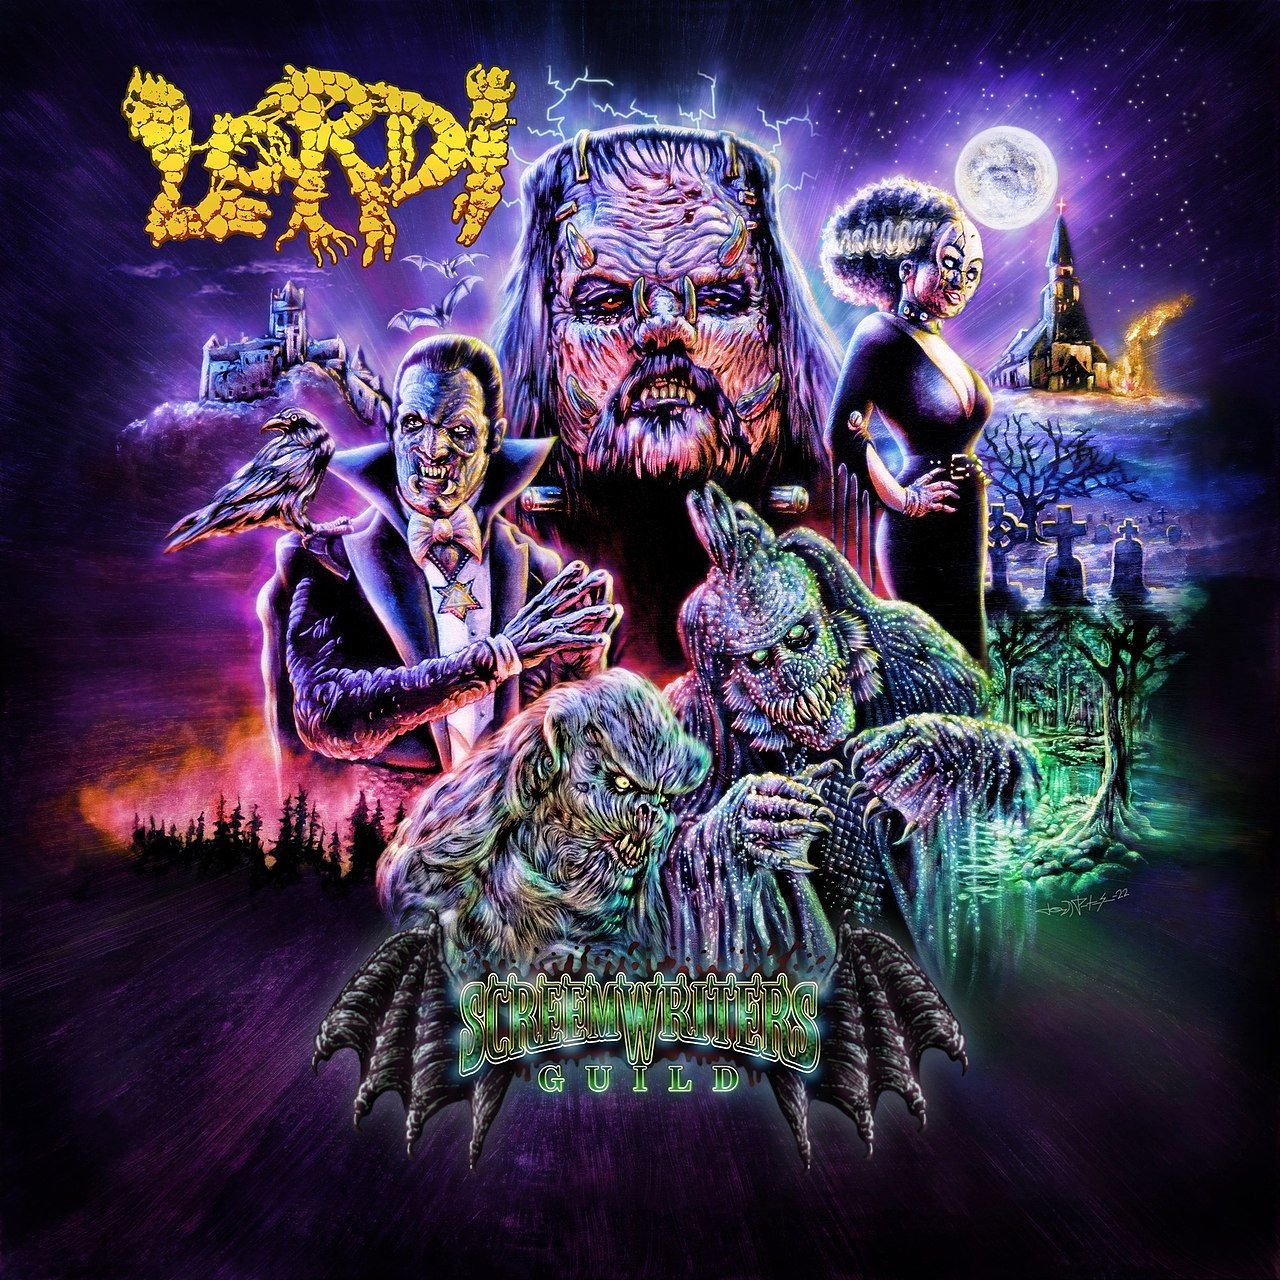 Lordi - Thing in the Cage (lyric video)